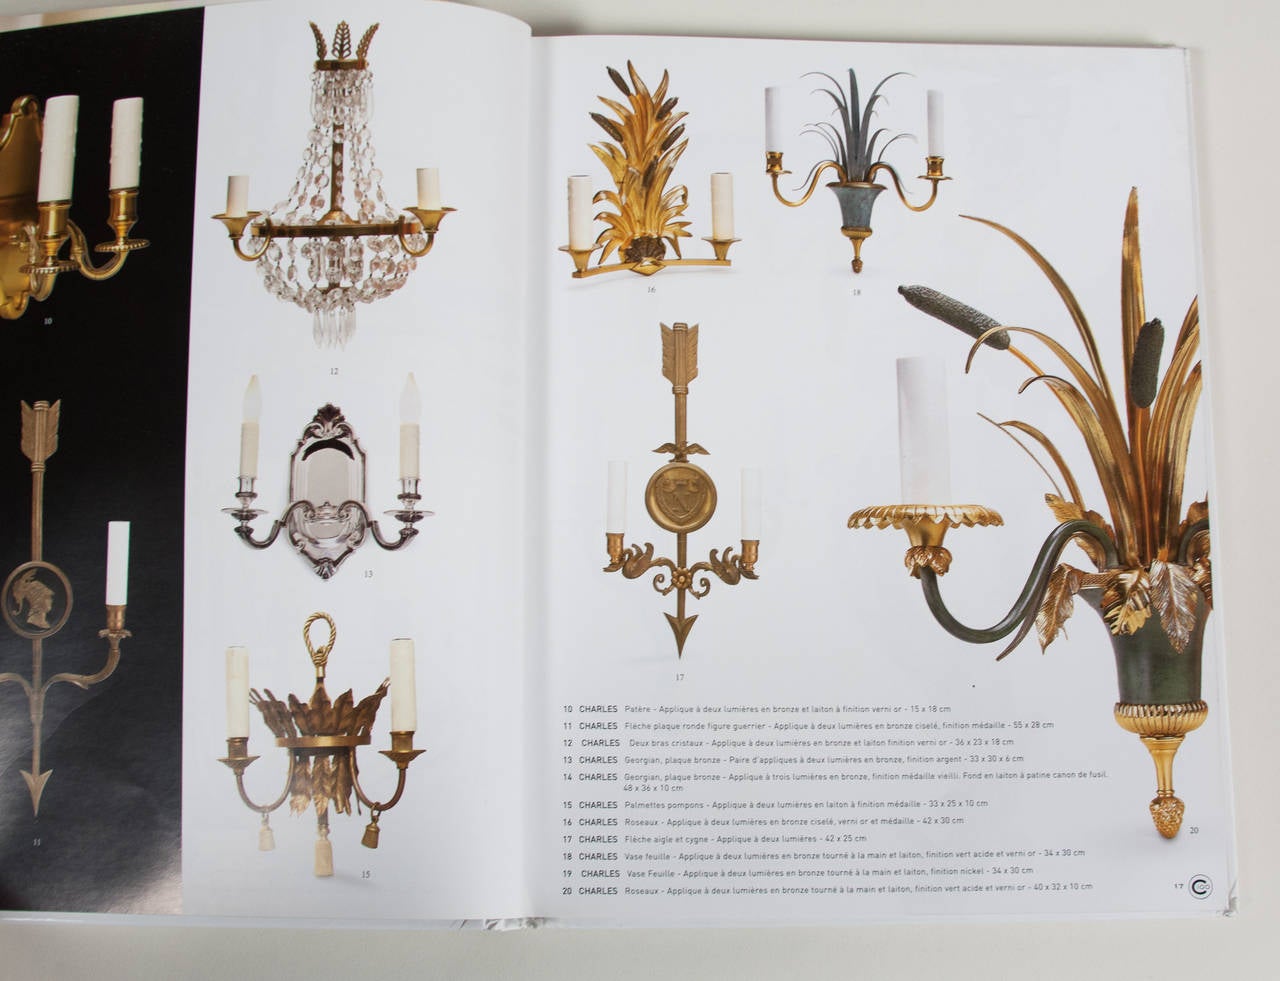 Book: Maison Charles. La Vente du Centenaire. Catalog for an auction commemorating the 100th anniversary of the famous lighting design studio. Auction conducted by Millon Cornette St. Cyr on Nov 16, 2009, Paris, France. Hardcover, printed boards,